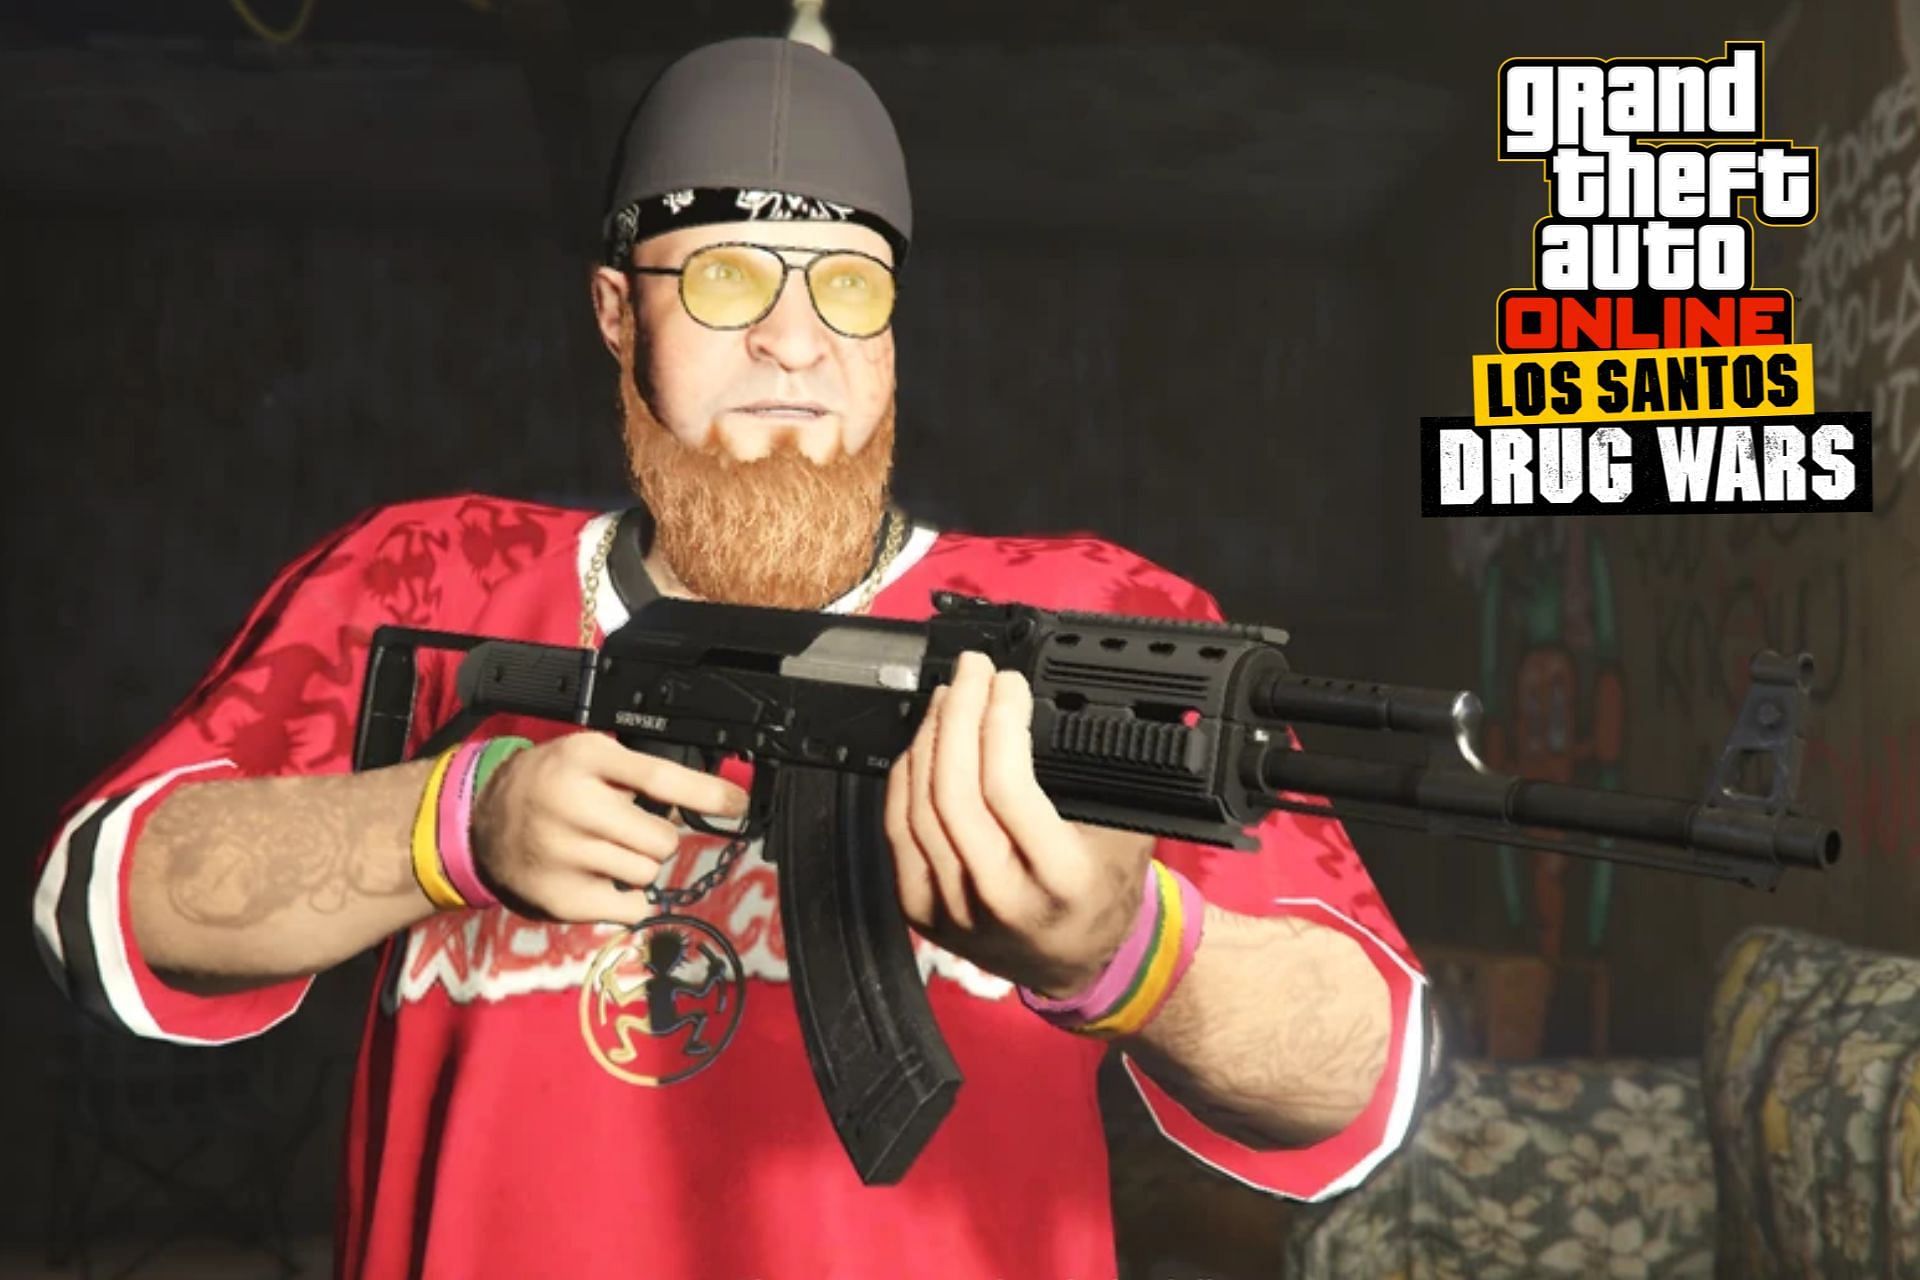 The First Dose missions are one of the most played missions in GTA Online (Image via GTA Fandom)